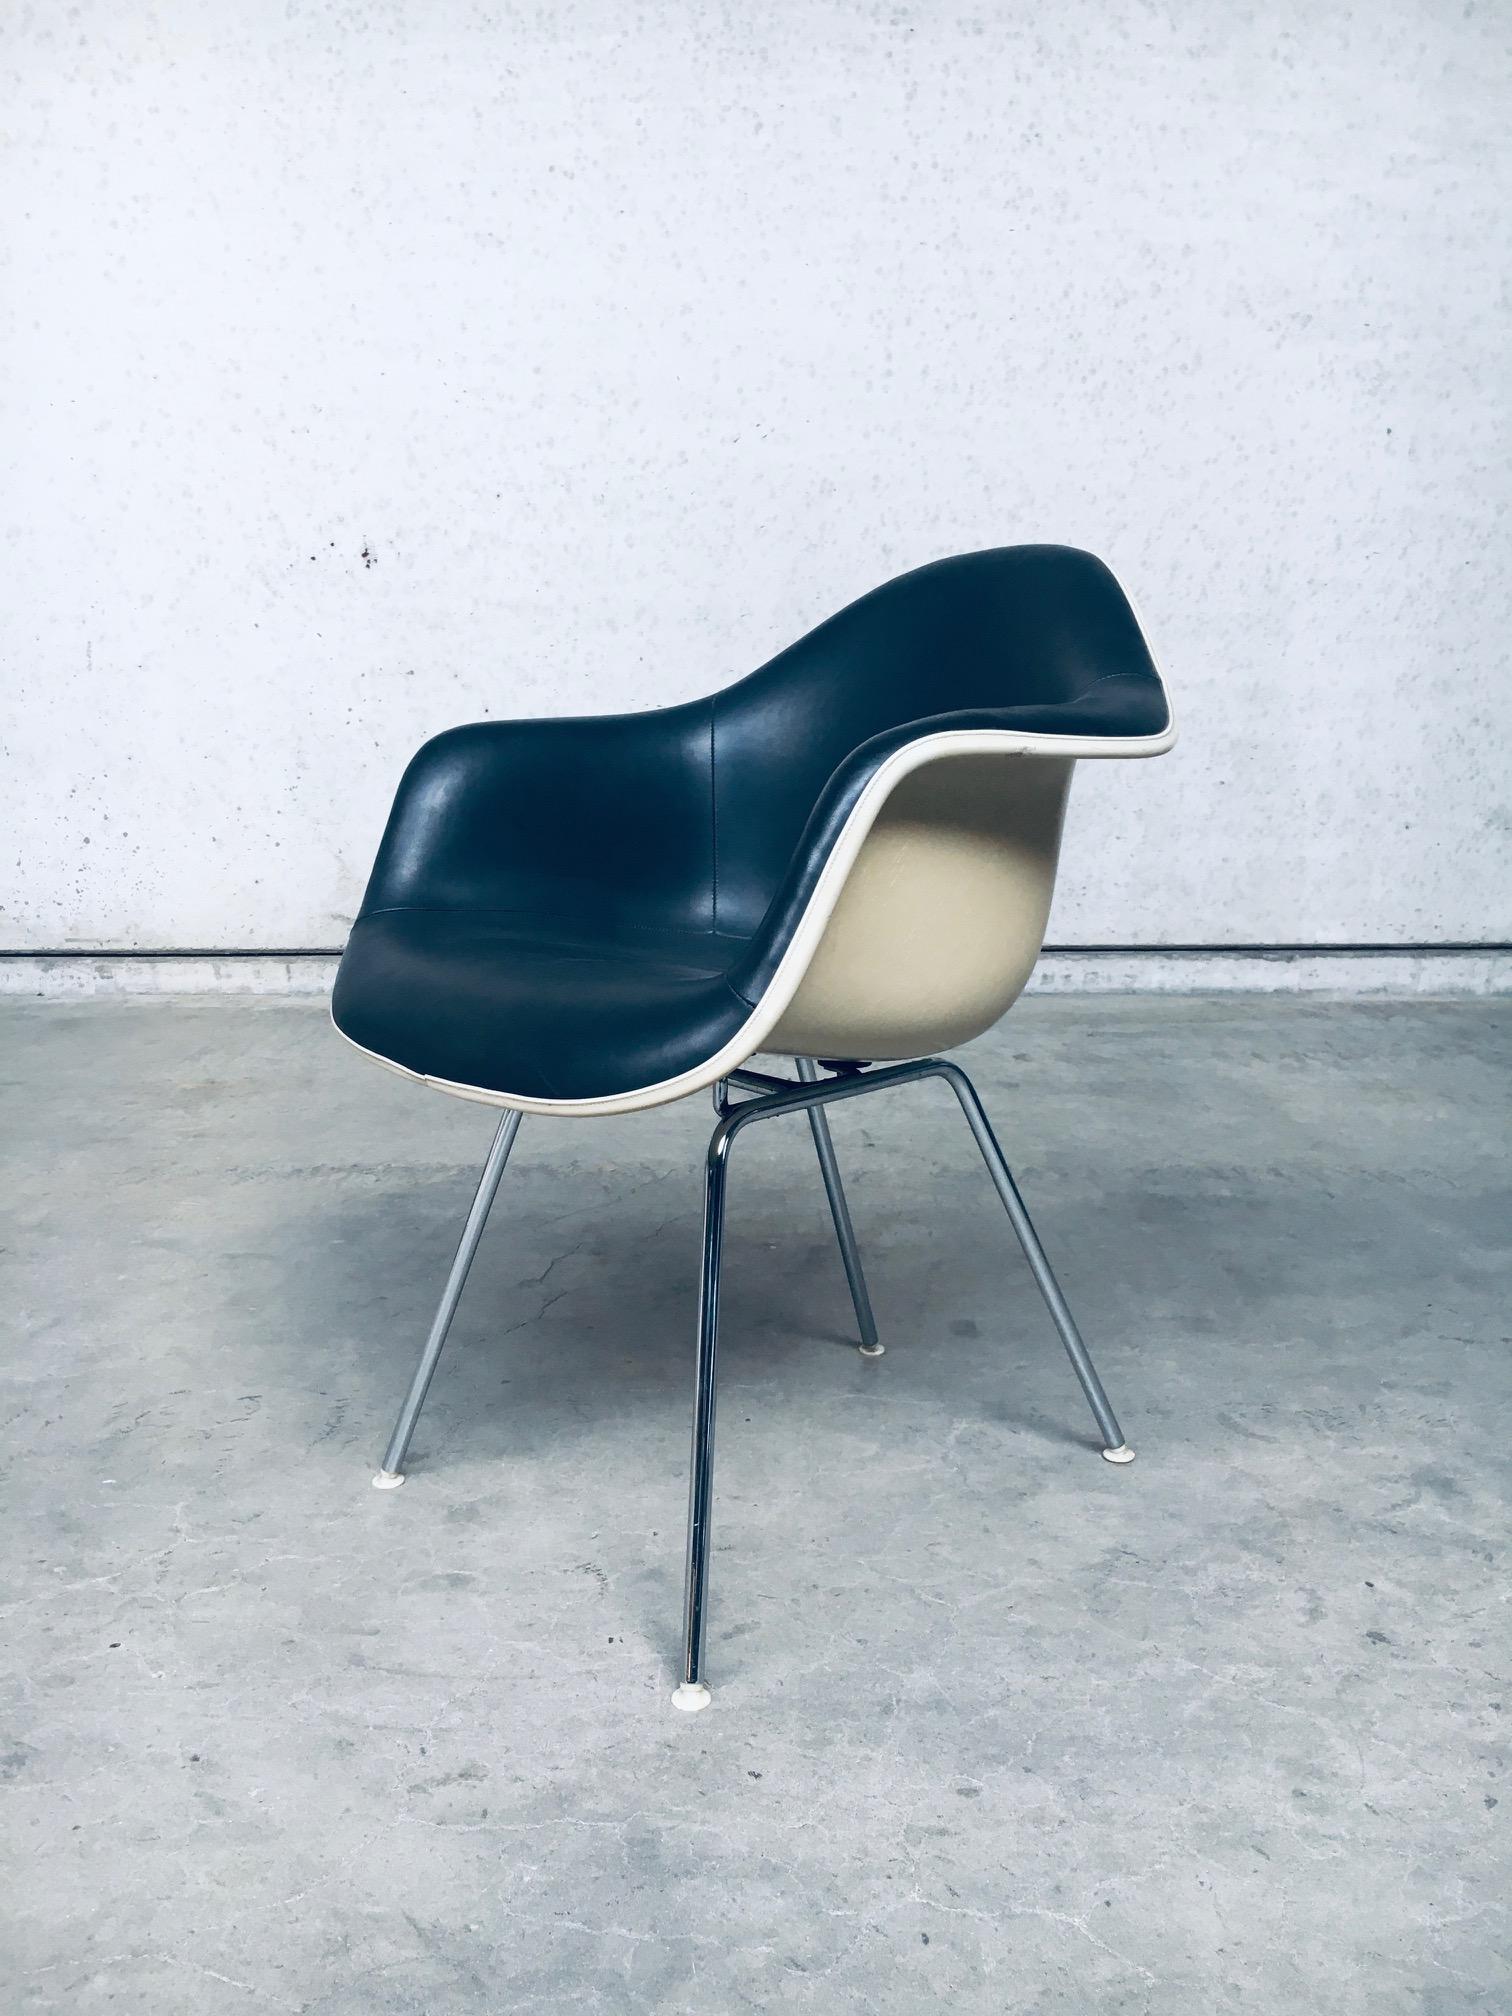 Vintage Mid-Century Modern design black leather DAX rope edge fiberglass Zenith shell armchair by Charles & Ray Eames for Herman Miller, made in the USA 1960's. Dark grey / black leather on cream white fiberglass Zenith shell with H frame chrome